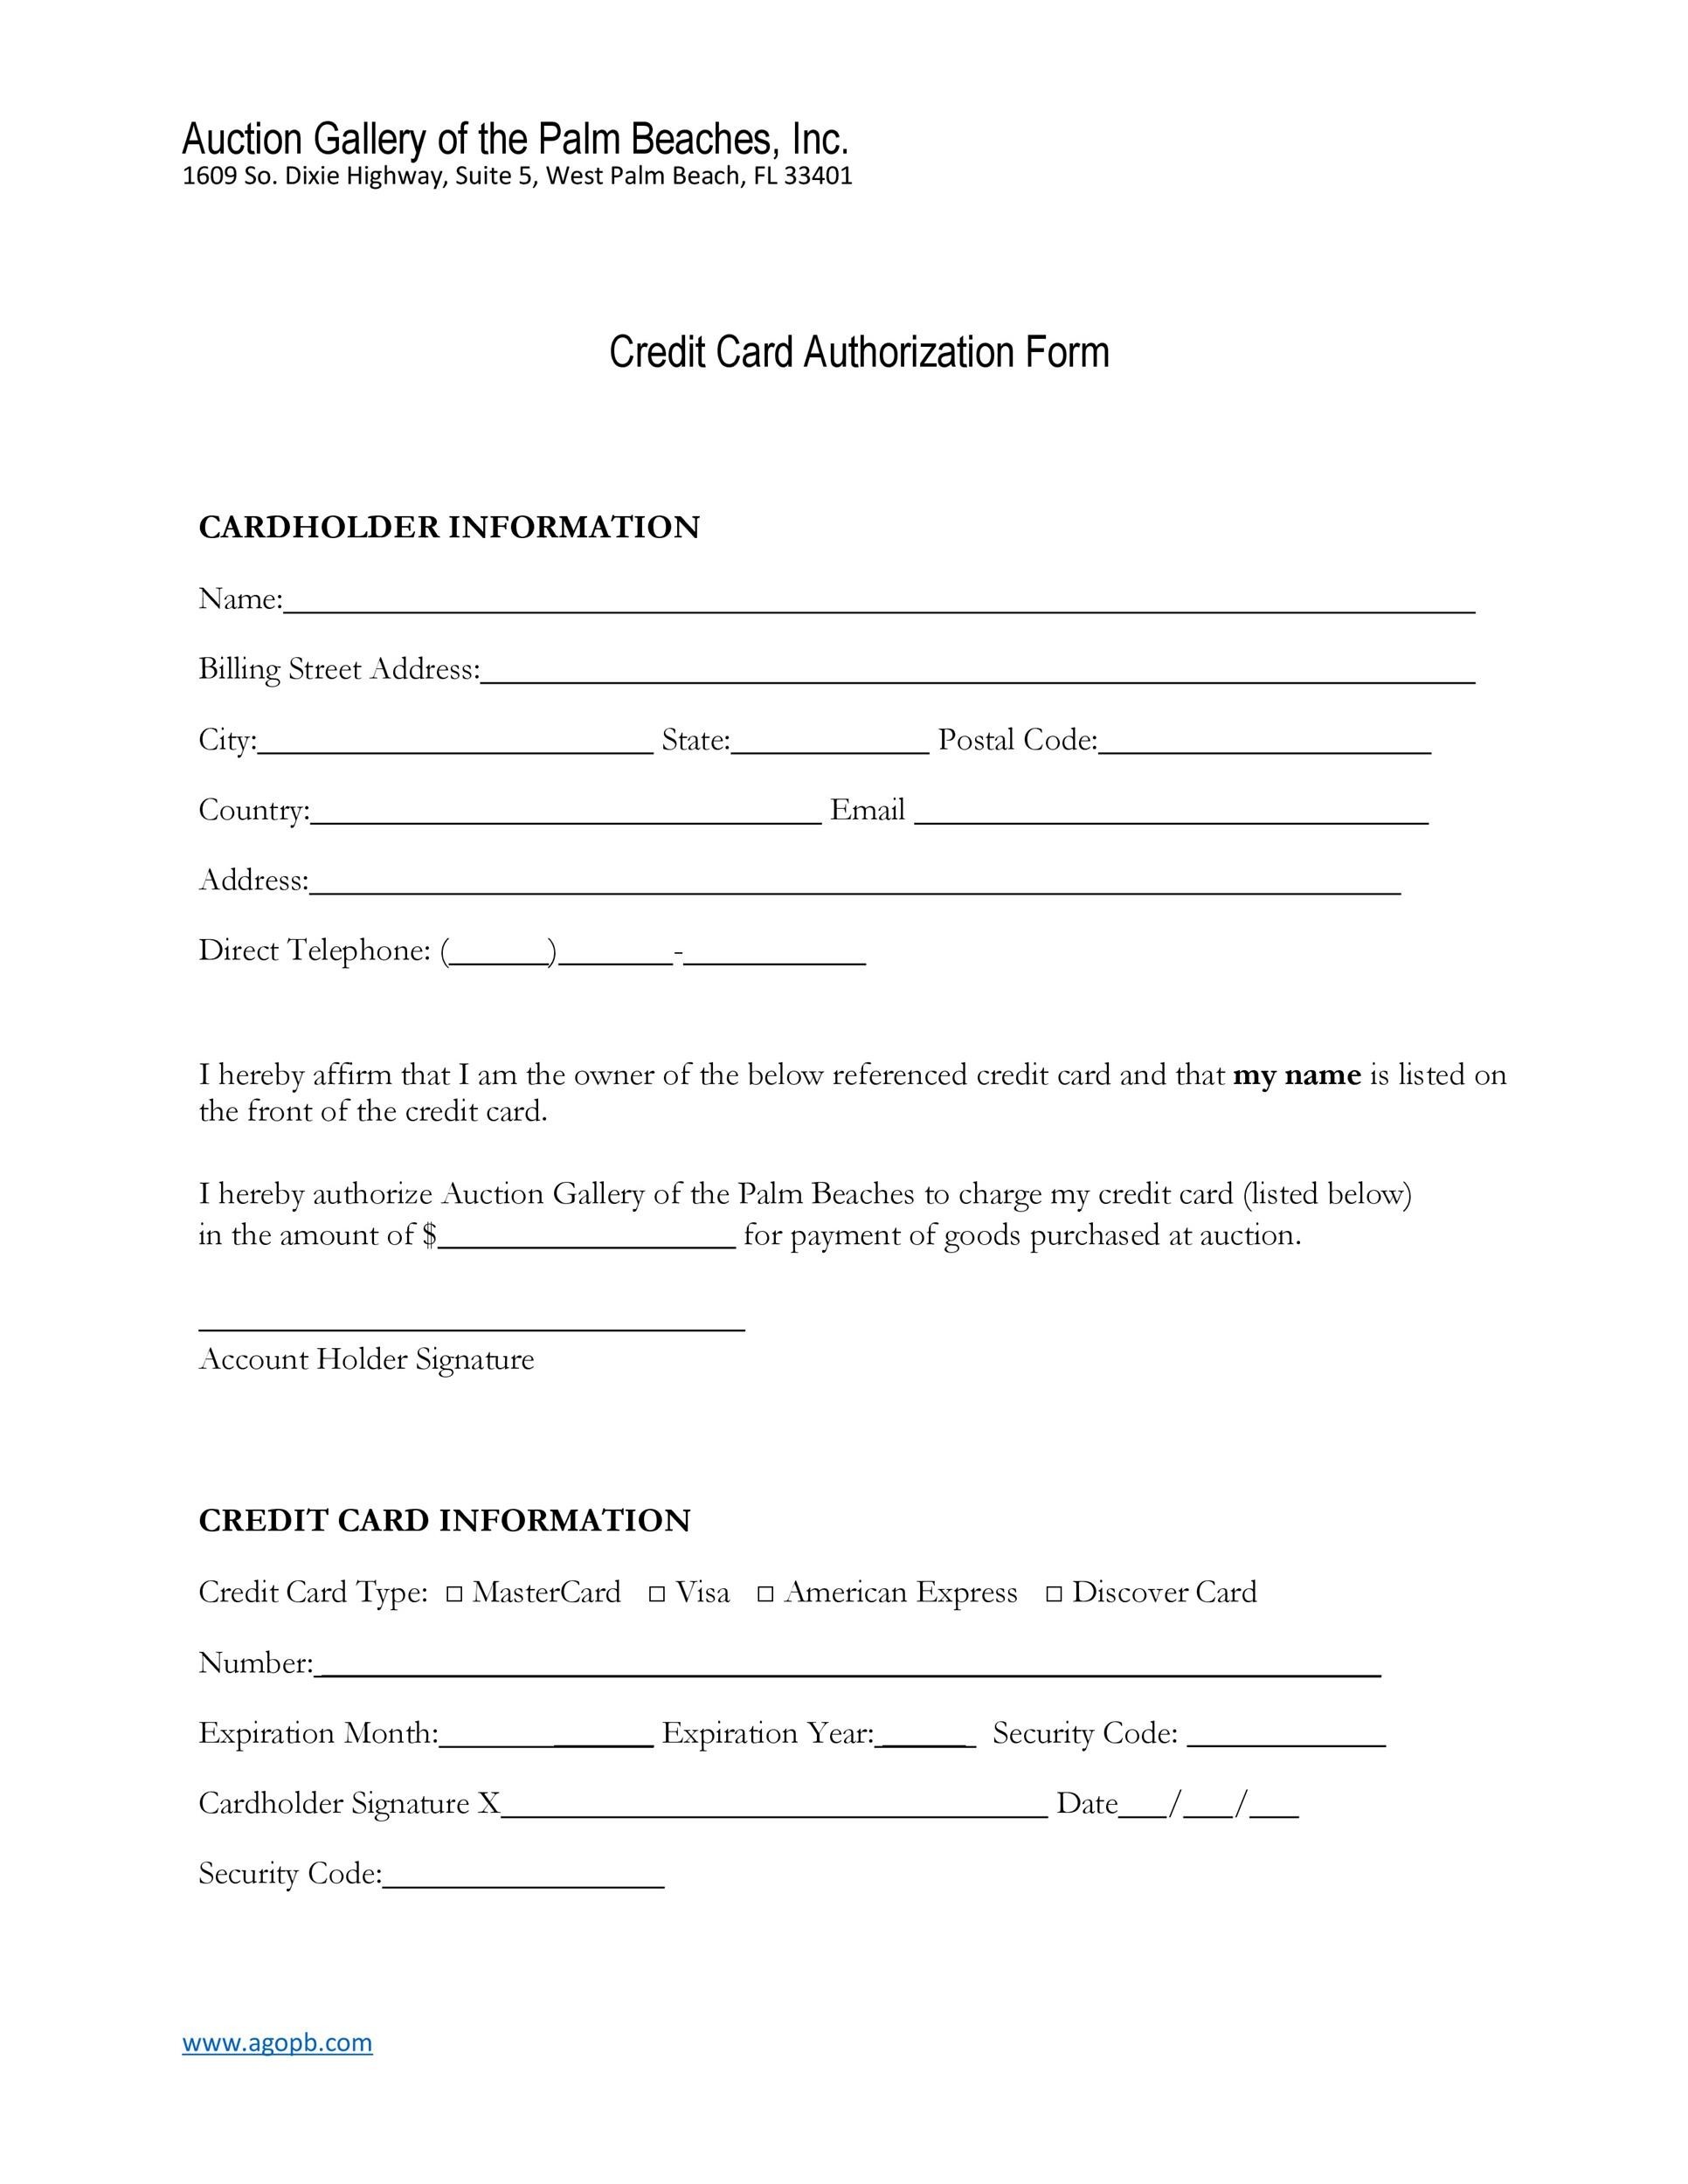 Credit Card Authorization Form Template from templatelab.com